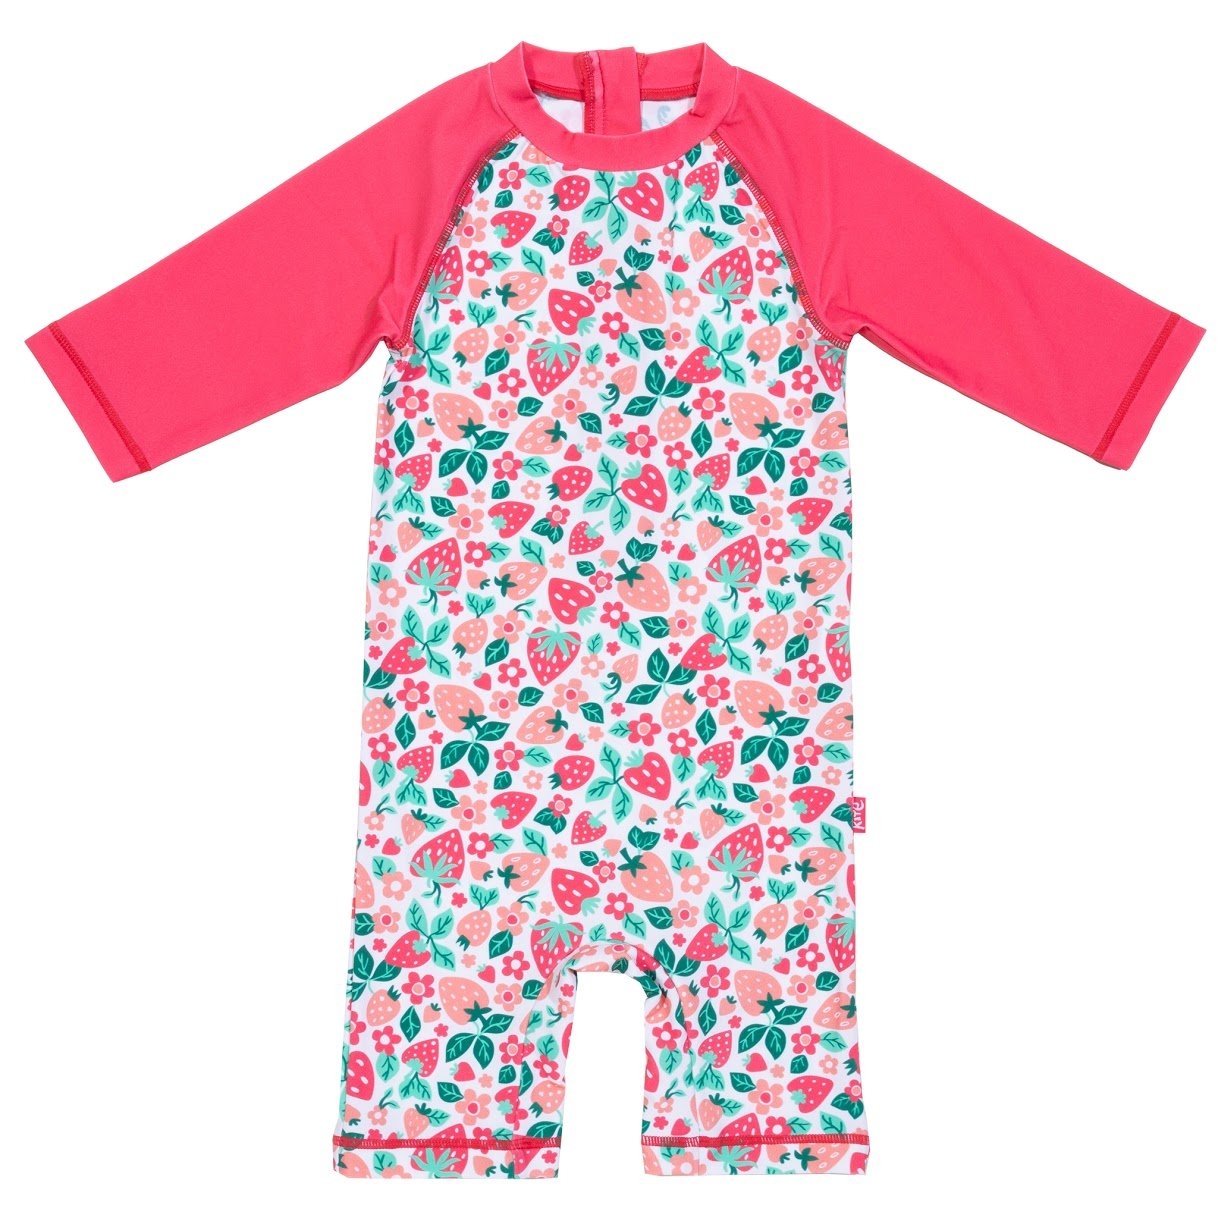 Kite Toddler Very Berry UPF50+ Sunsuit Swimsuit – Pink – 18-24 months